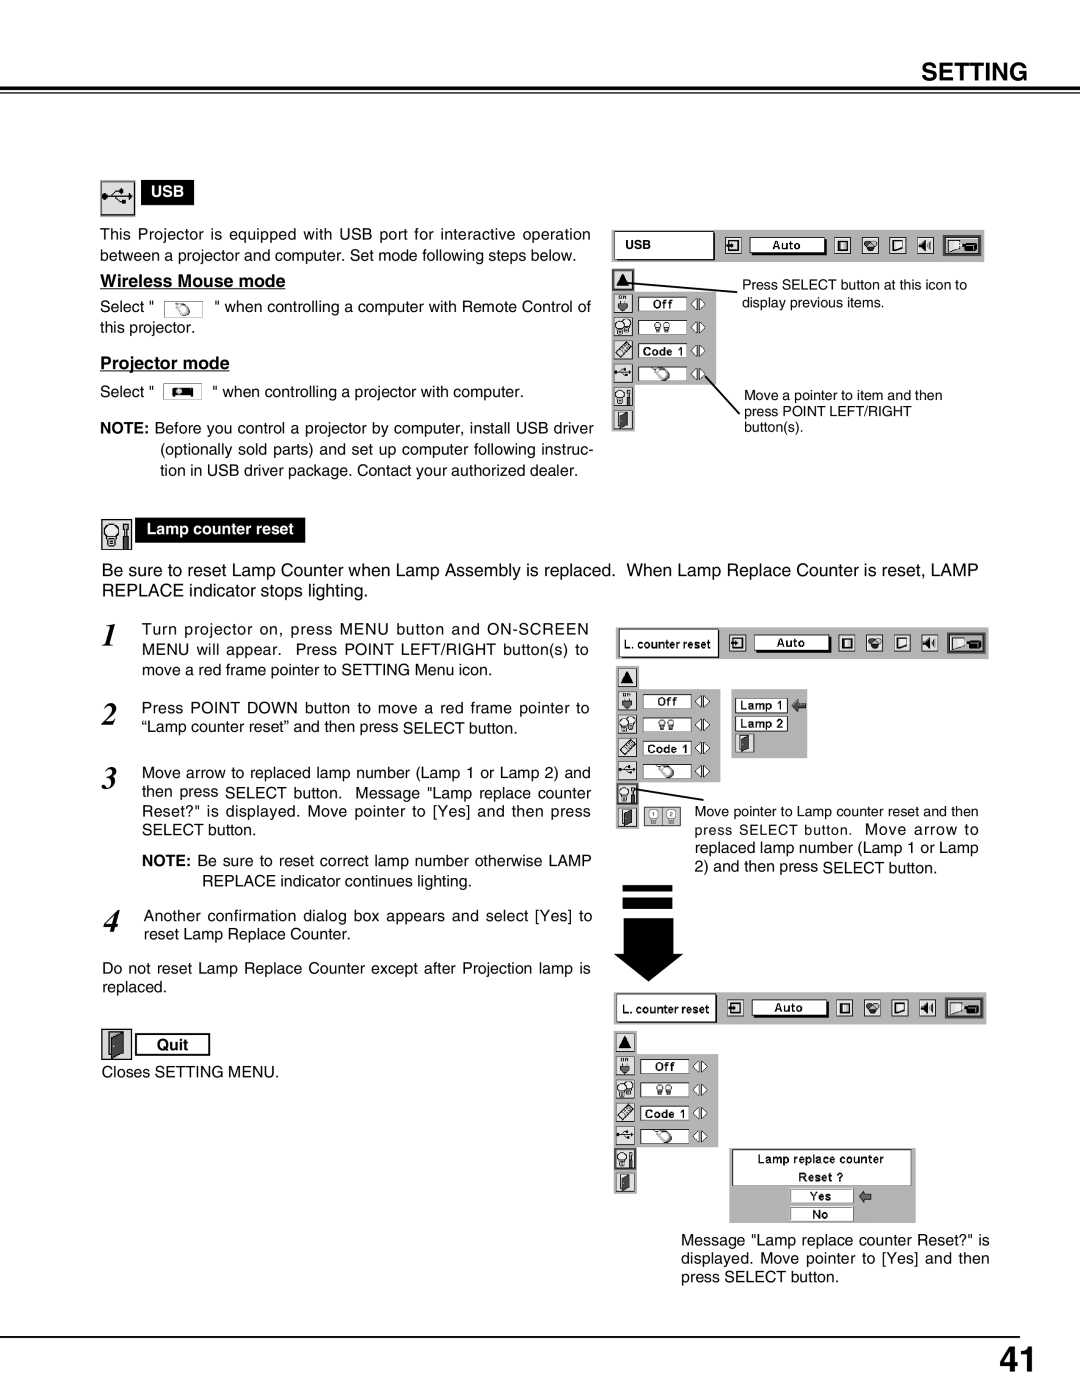 Christie Digital Systems 38-MX2001-01 user manual Setting, Wireless Mouse mode, Projector mode, Lamp counter reset 